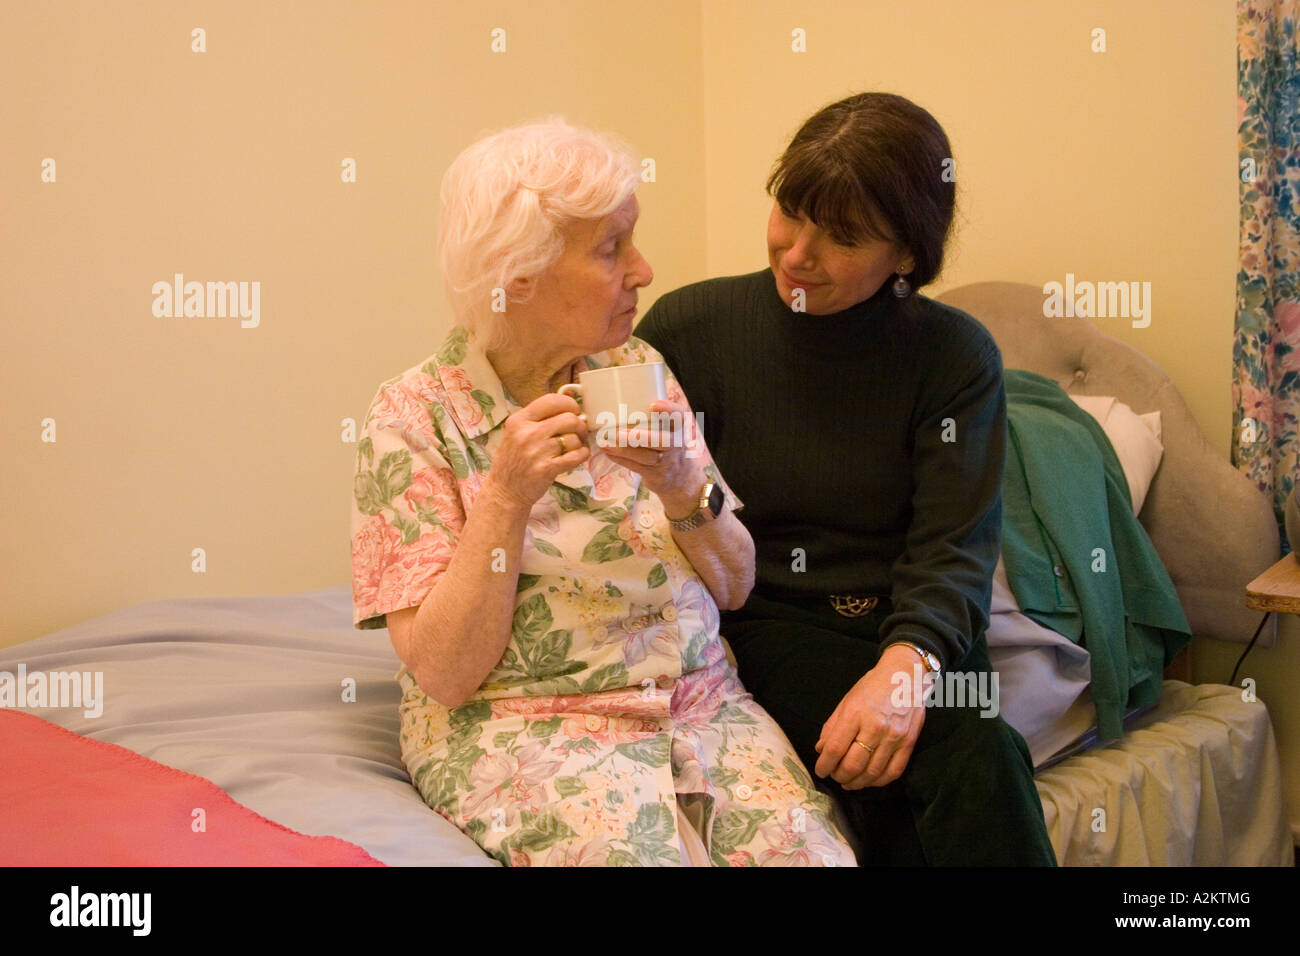 woman/daughter/care worker sitting on edge of bed with old lady/mother in her room/nursing home Stock Photo